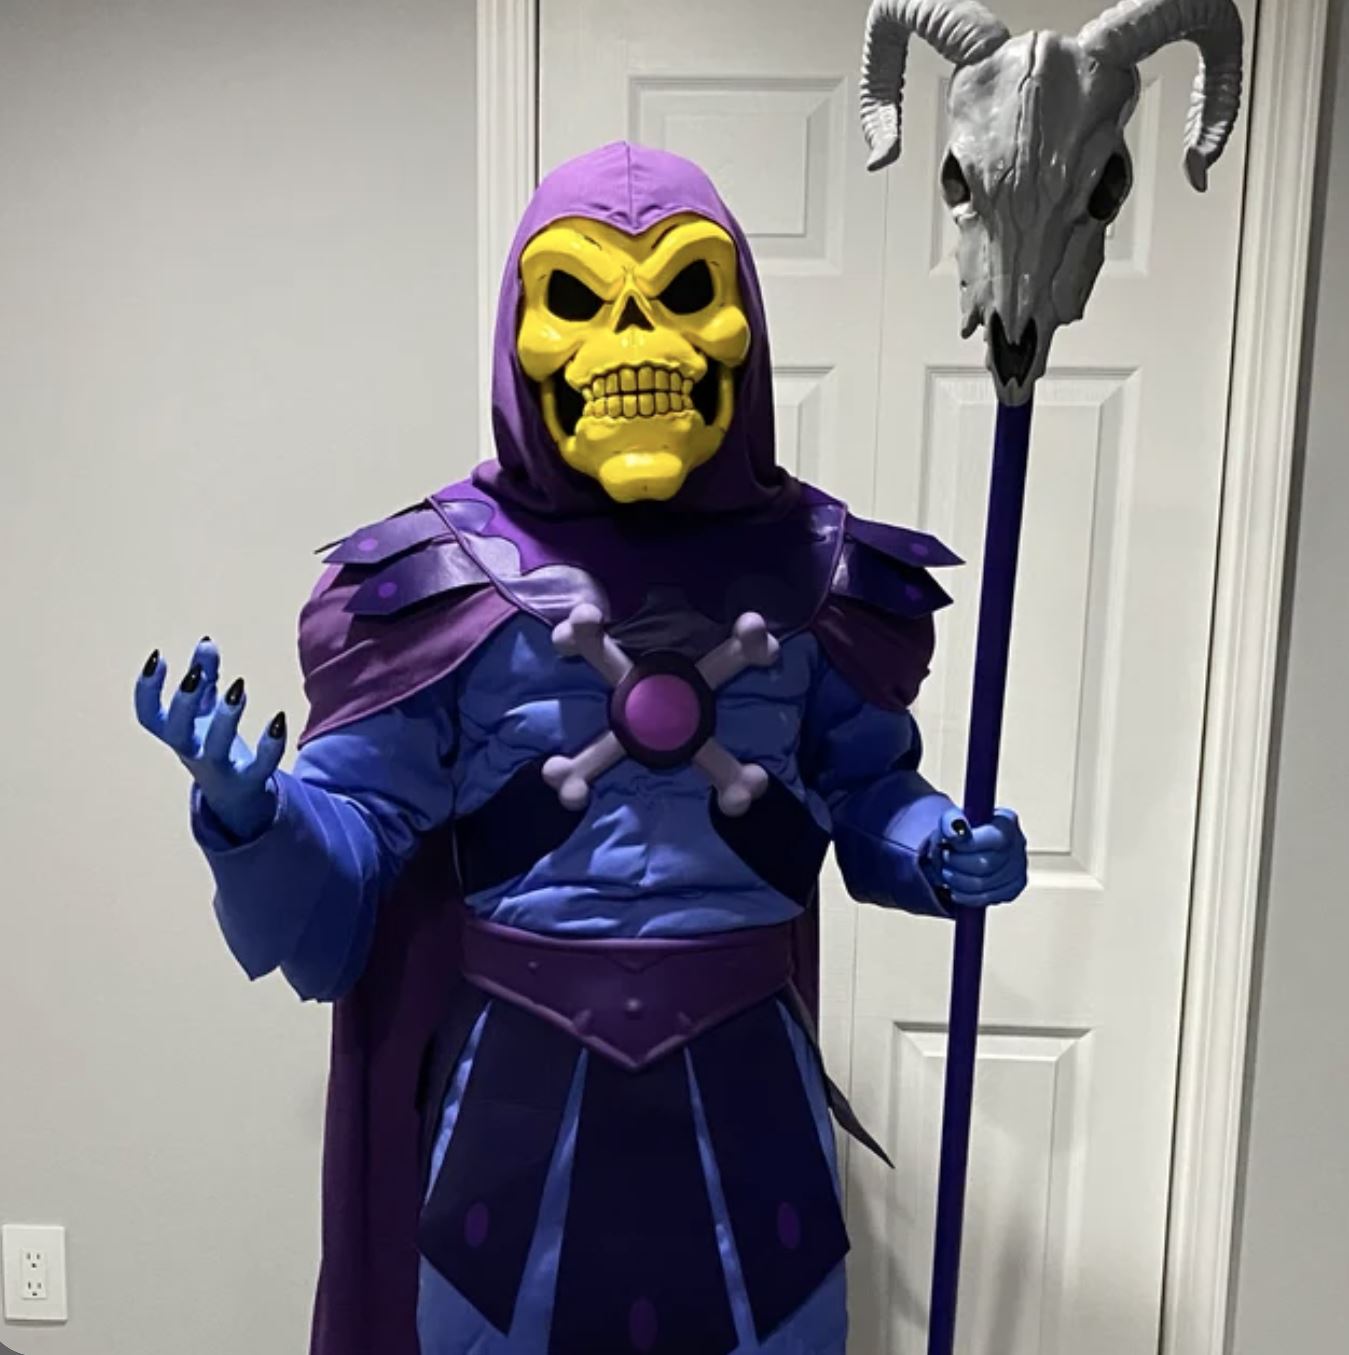 diane slaten recommends pictures of skeletor from he man pic